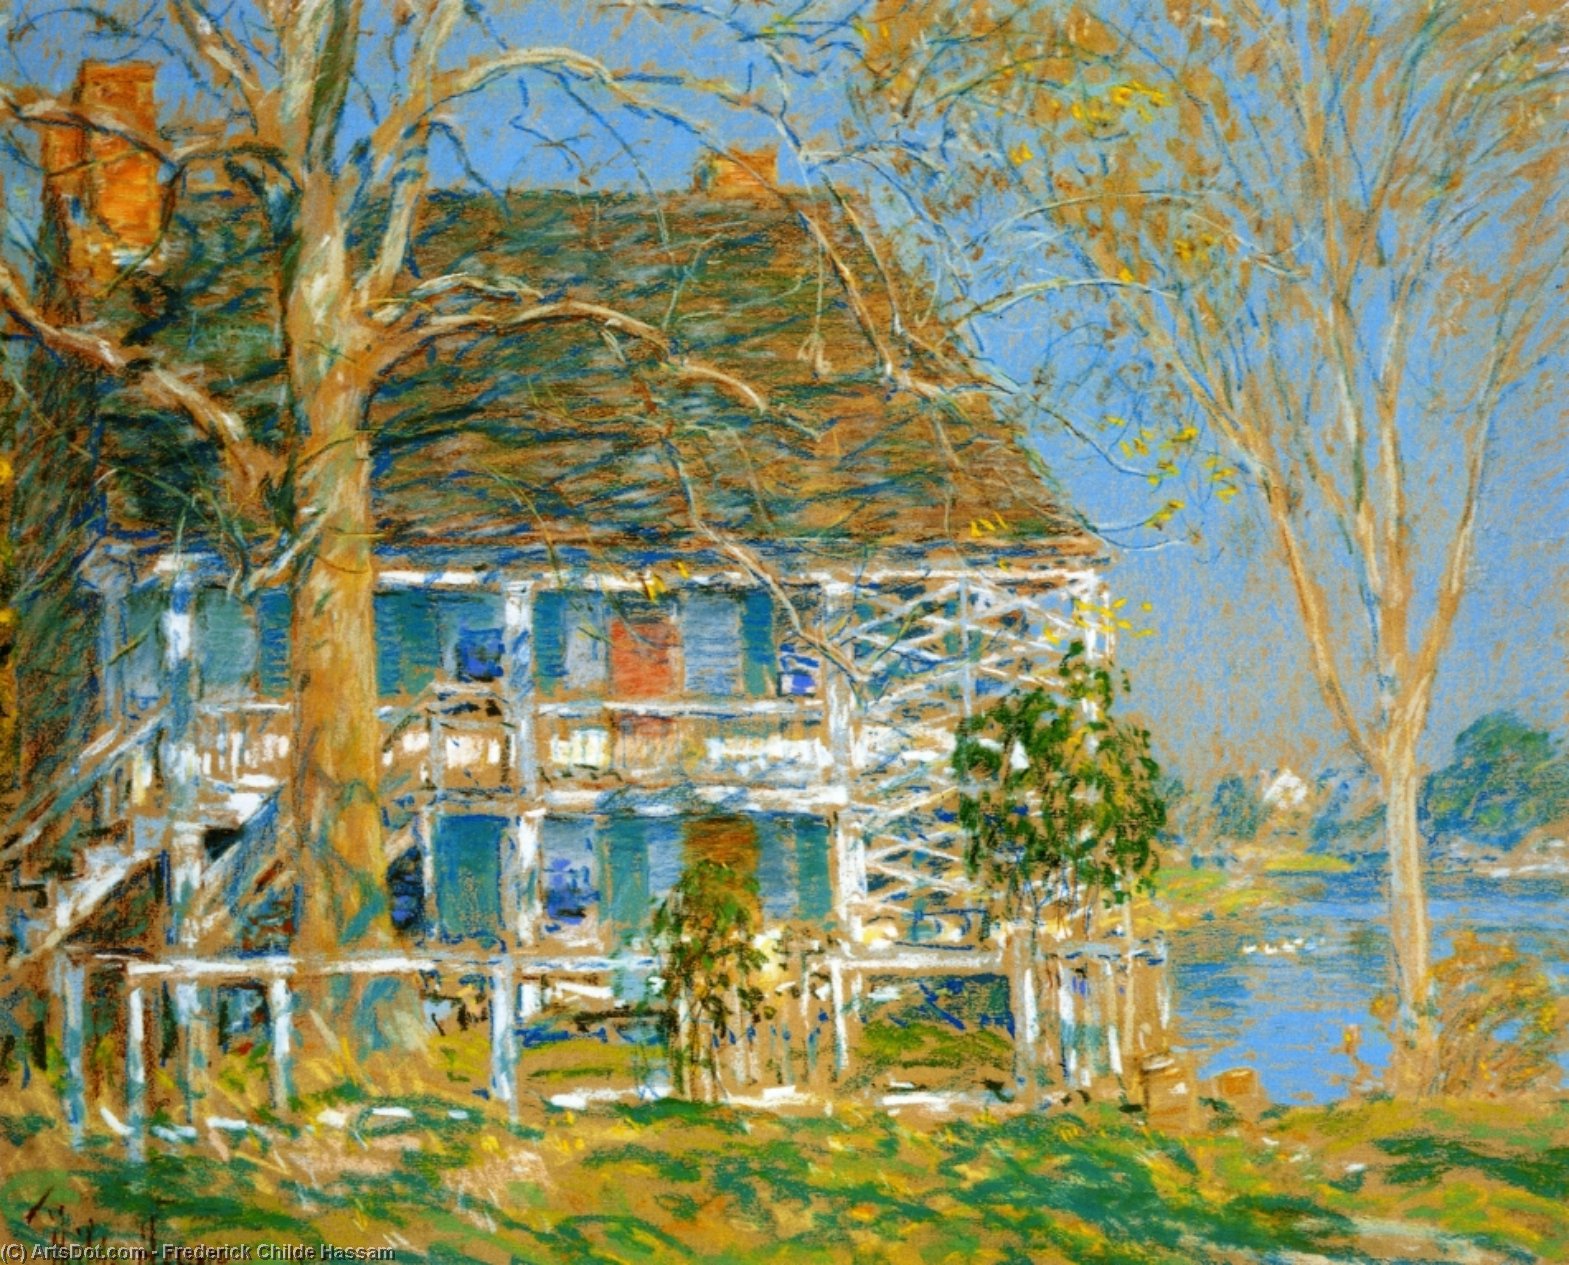 WikiOO.org - Encyclopedia of Fine Arts - Maalaus, taideteos Frederick Childe Hassam - Unknown (also known as The Old Brush House)